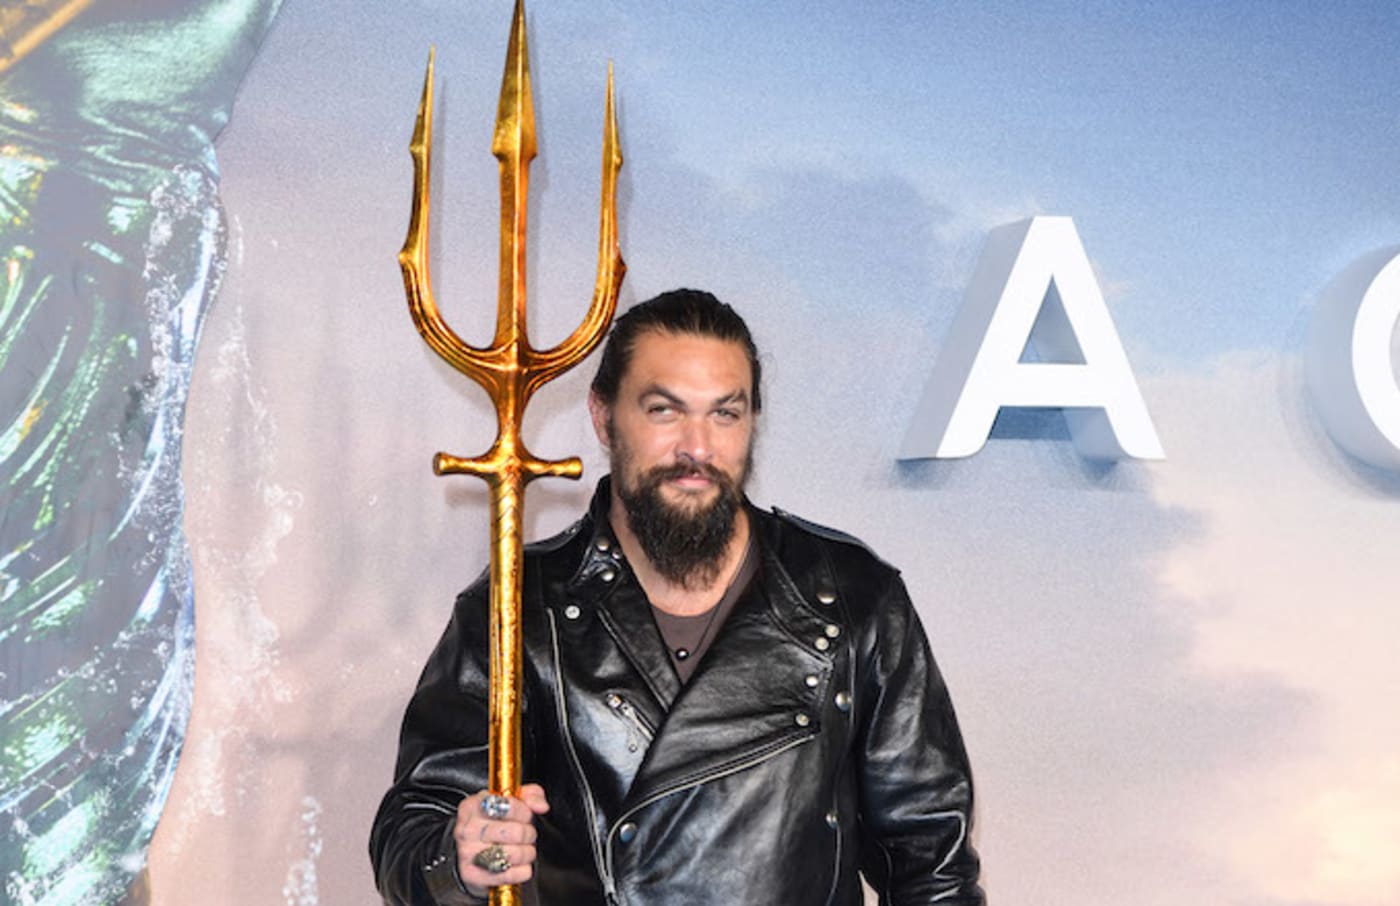 Jason Momoa attends the World Premiere of 'Aquaman' at Cineworld Leicester Square.